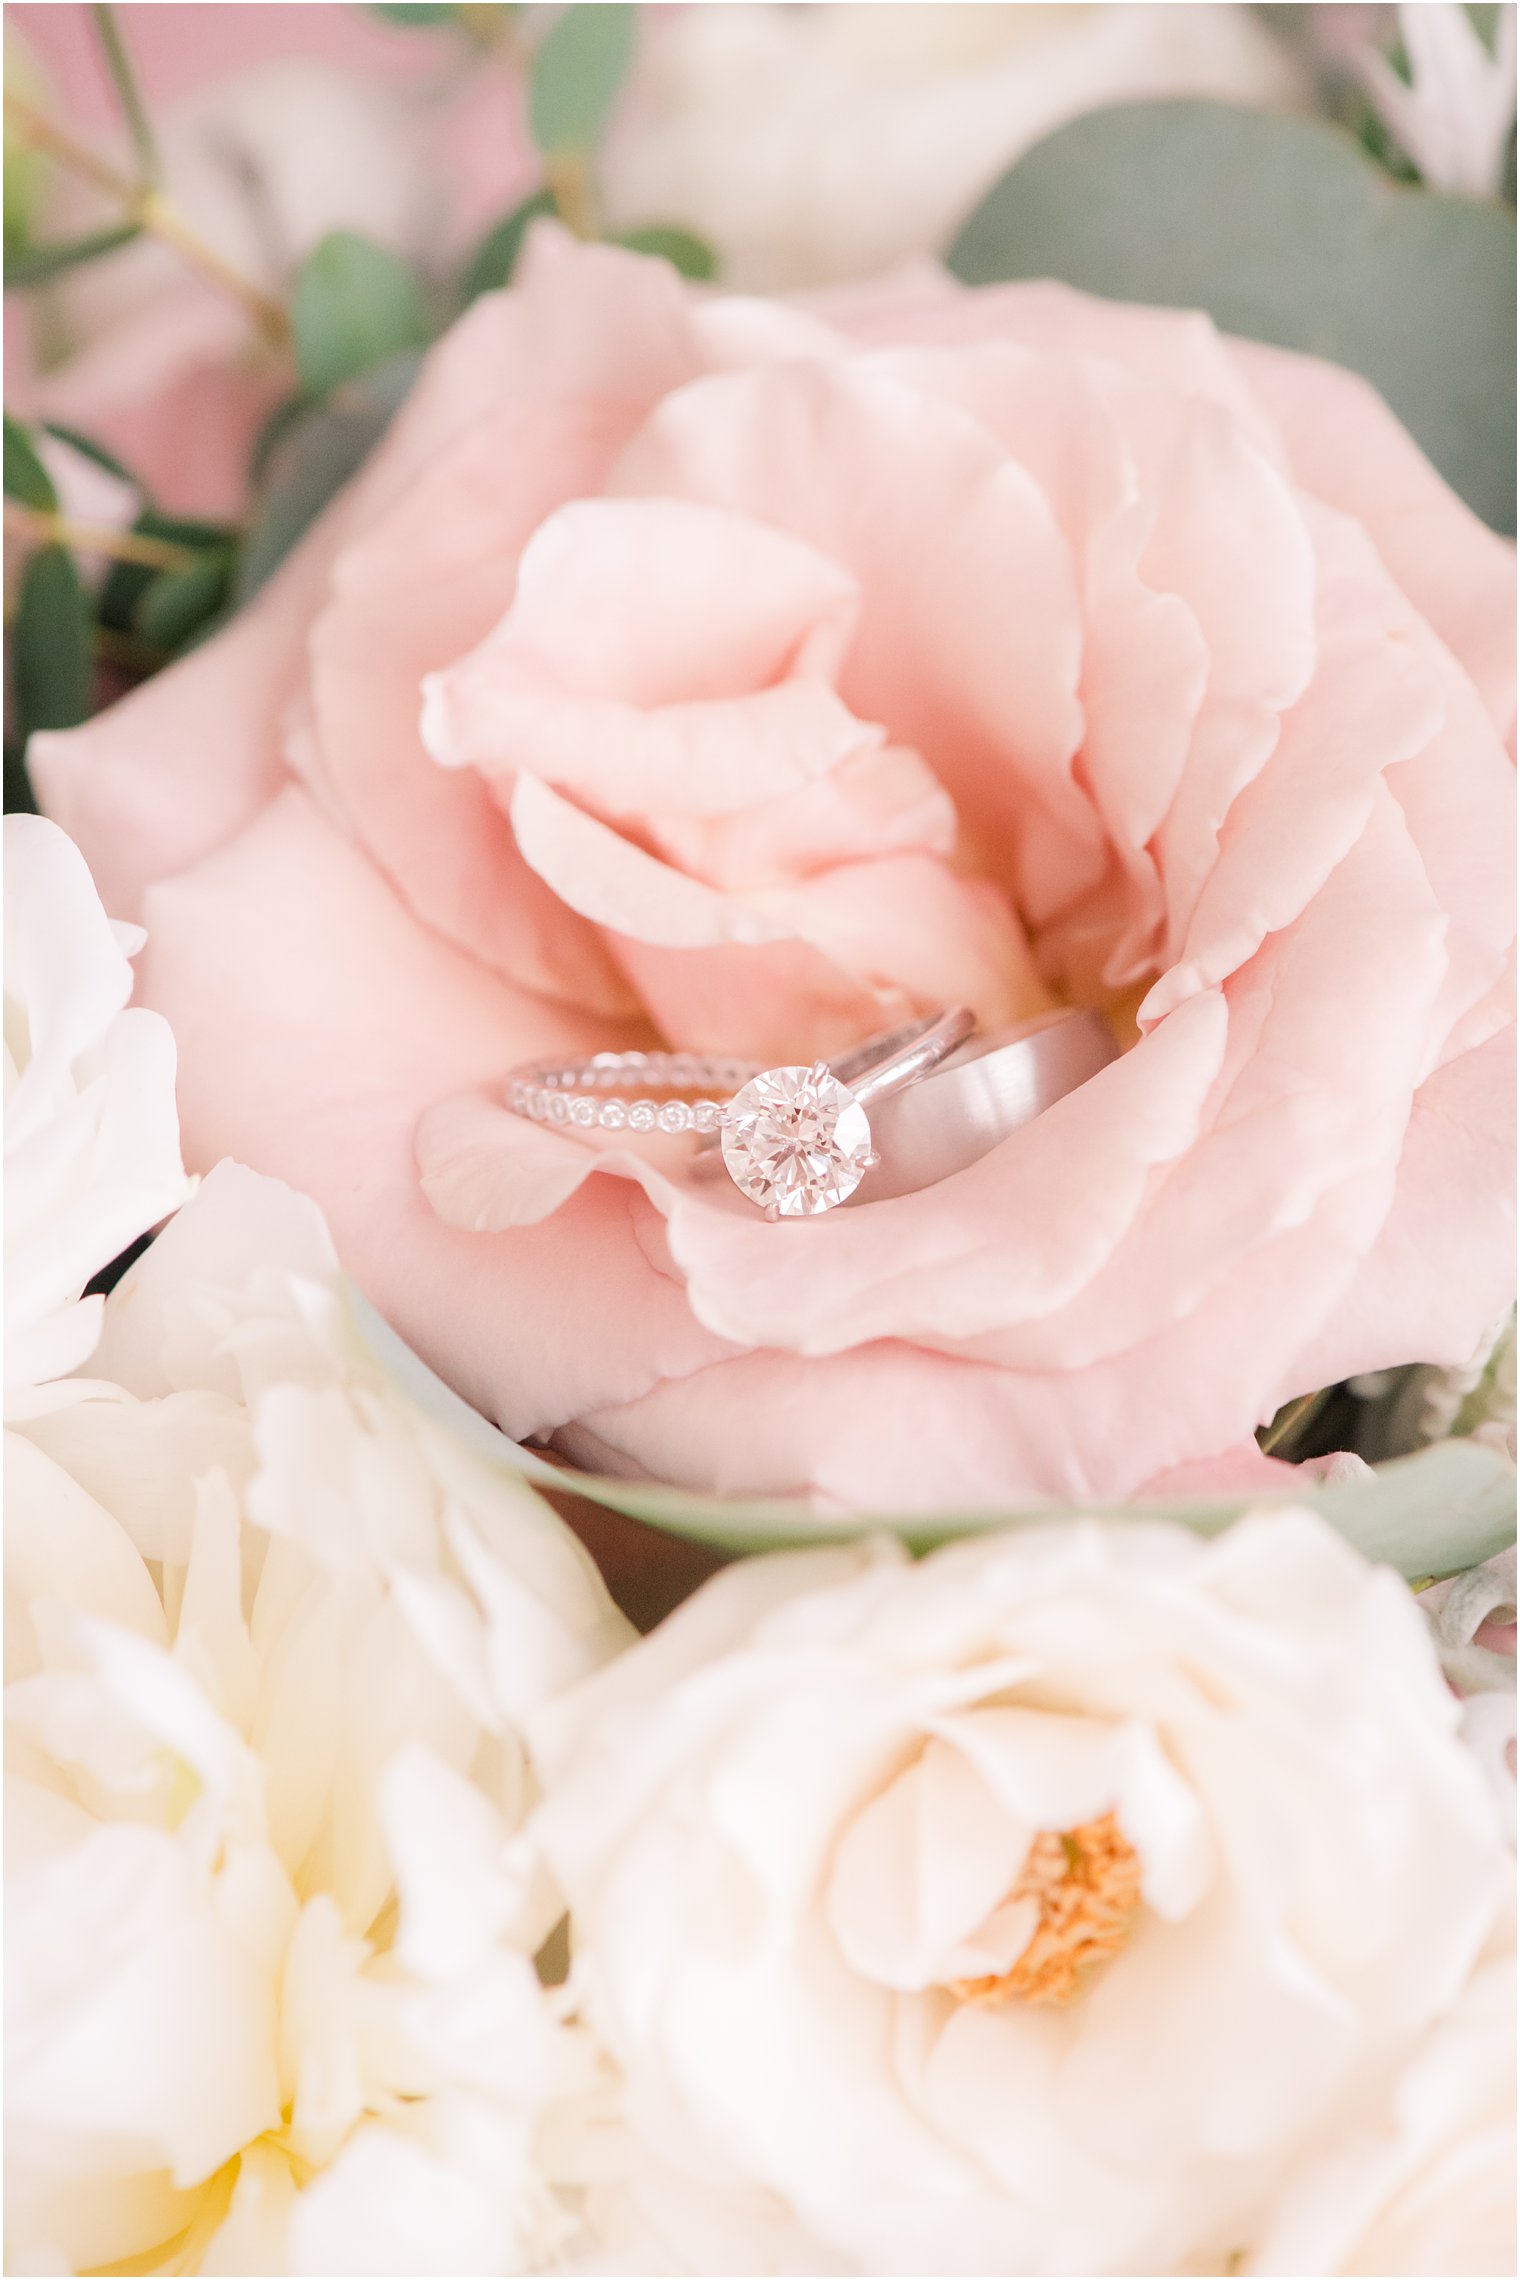 Engagement ring and wedding bands in bouquet